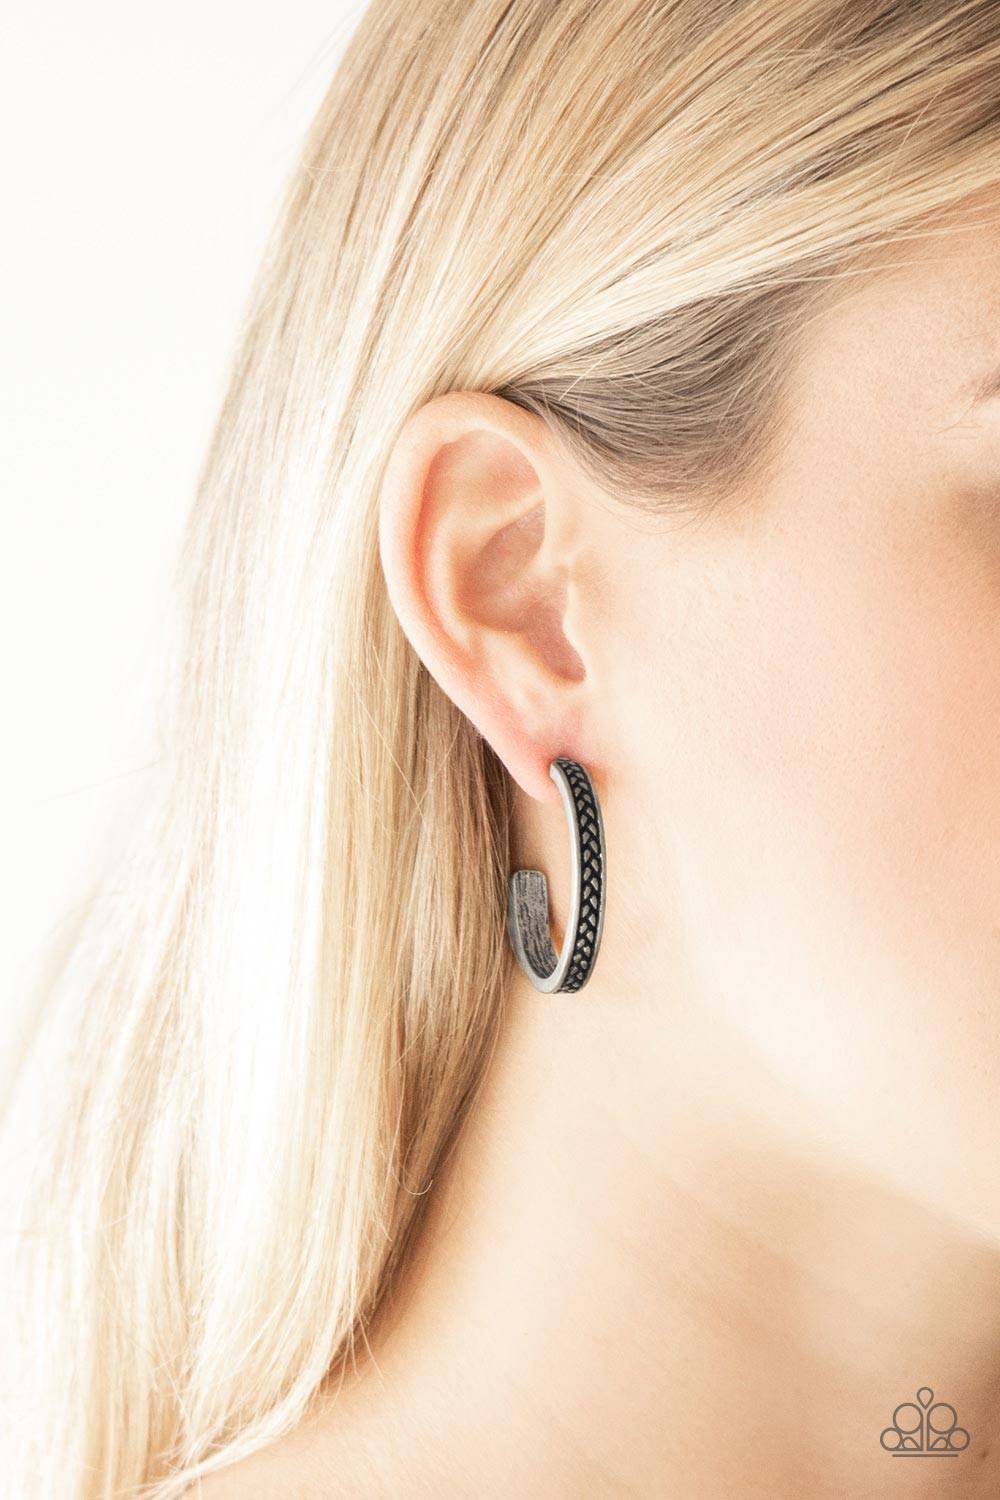 D109 - Rugged Retro Silver Earrings by Paparazzi Accessories on Fancy5Fashion.com